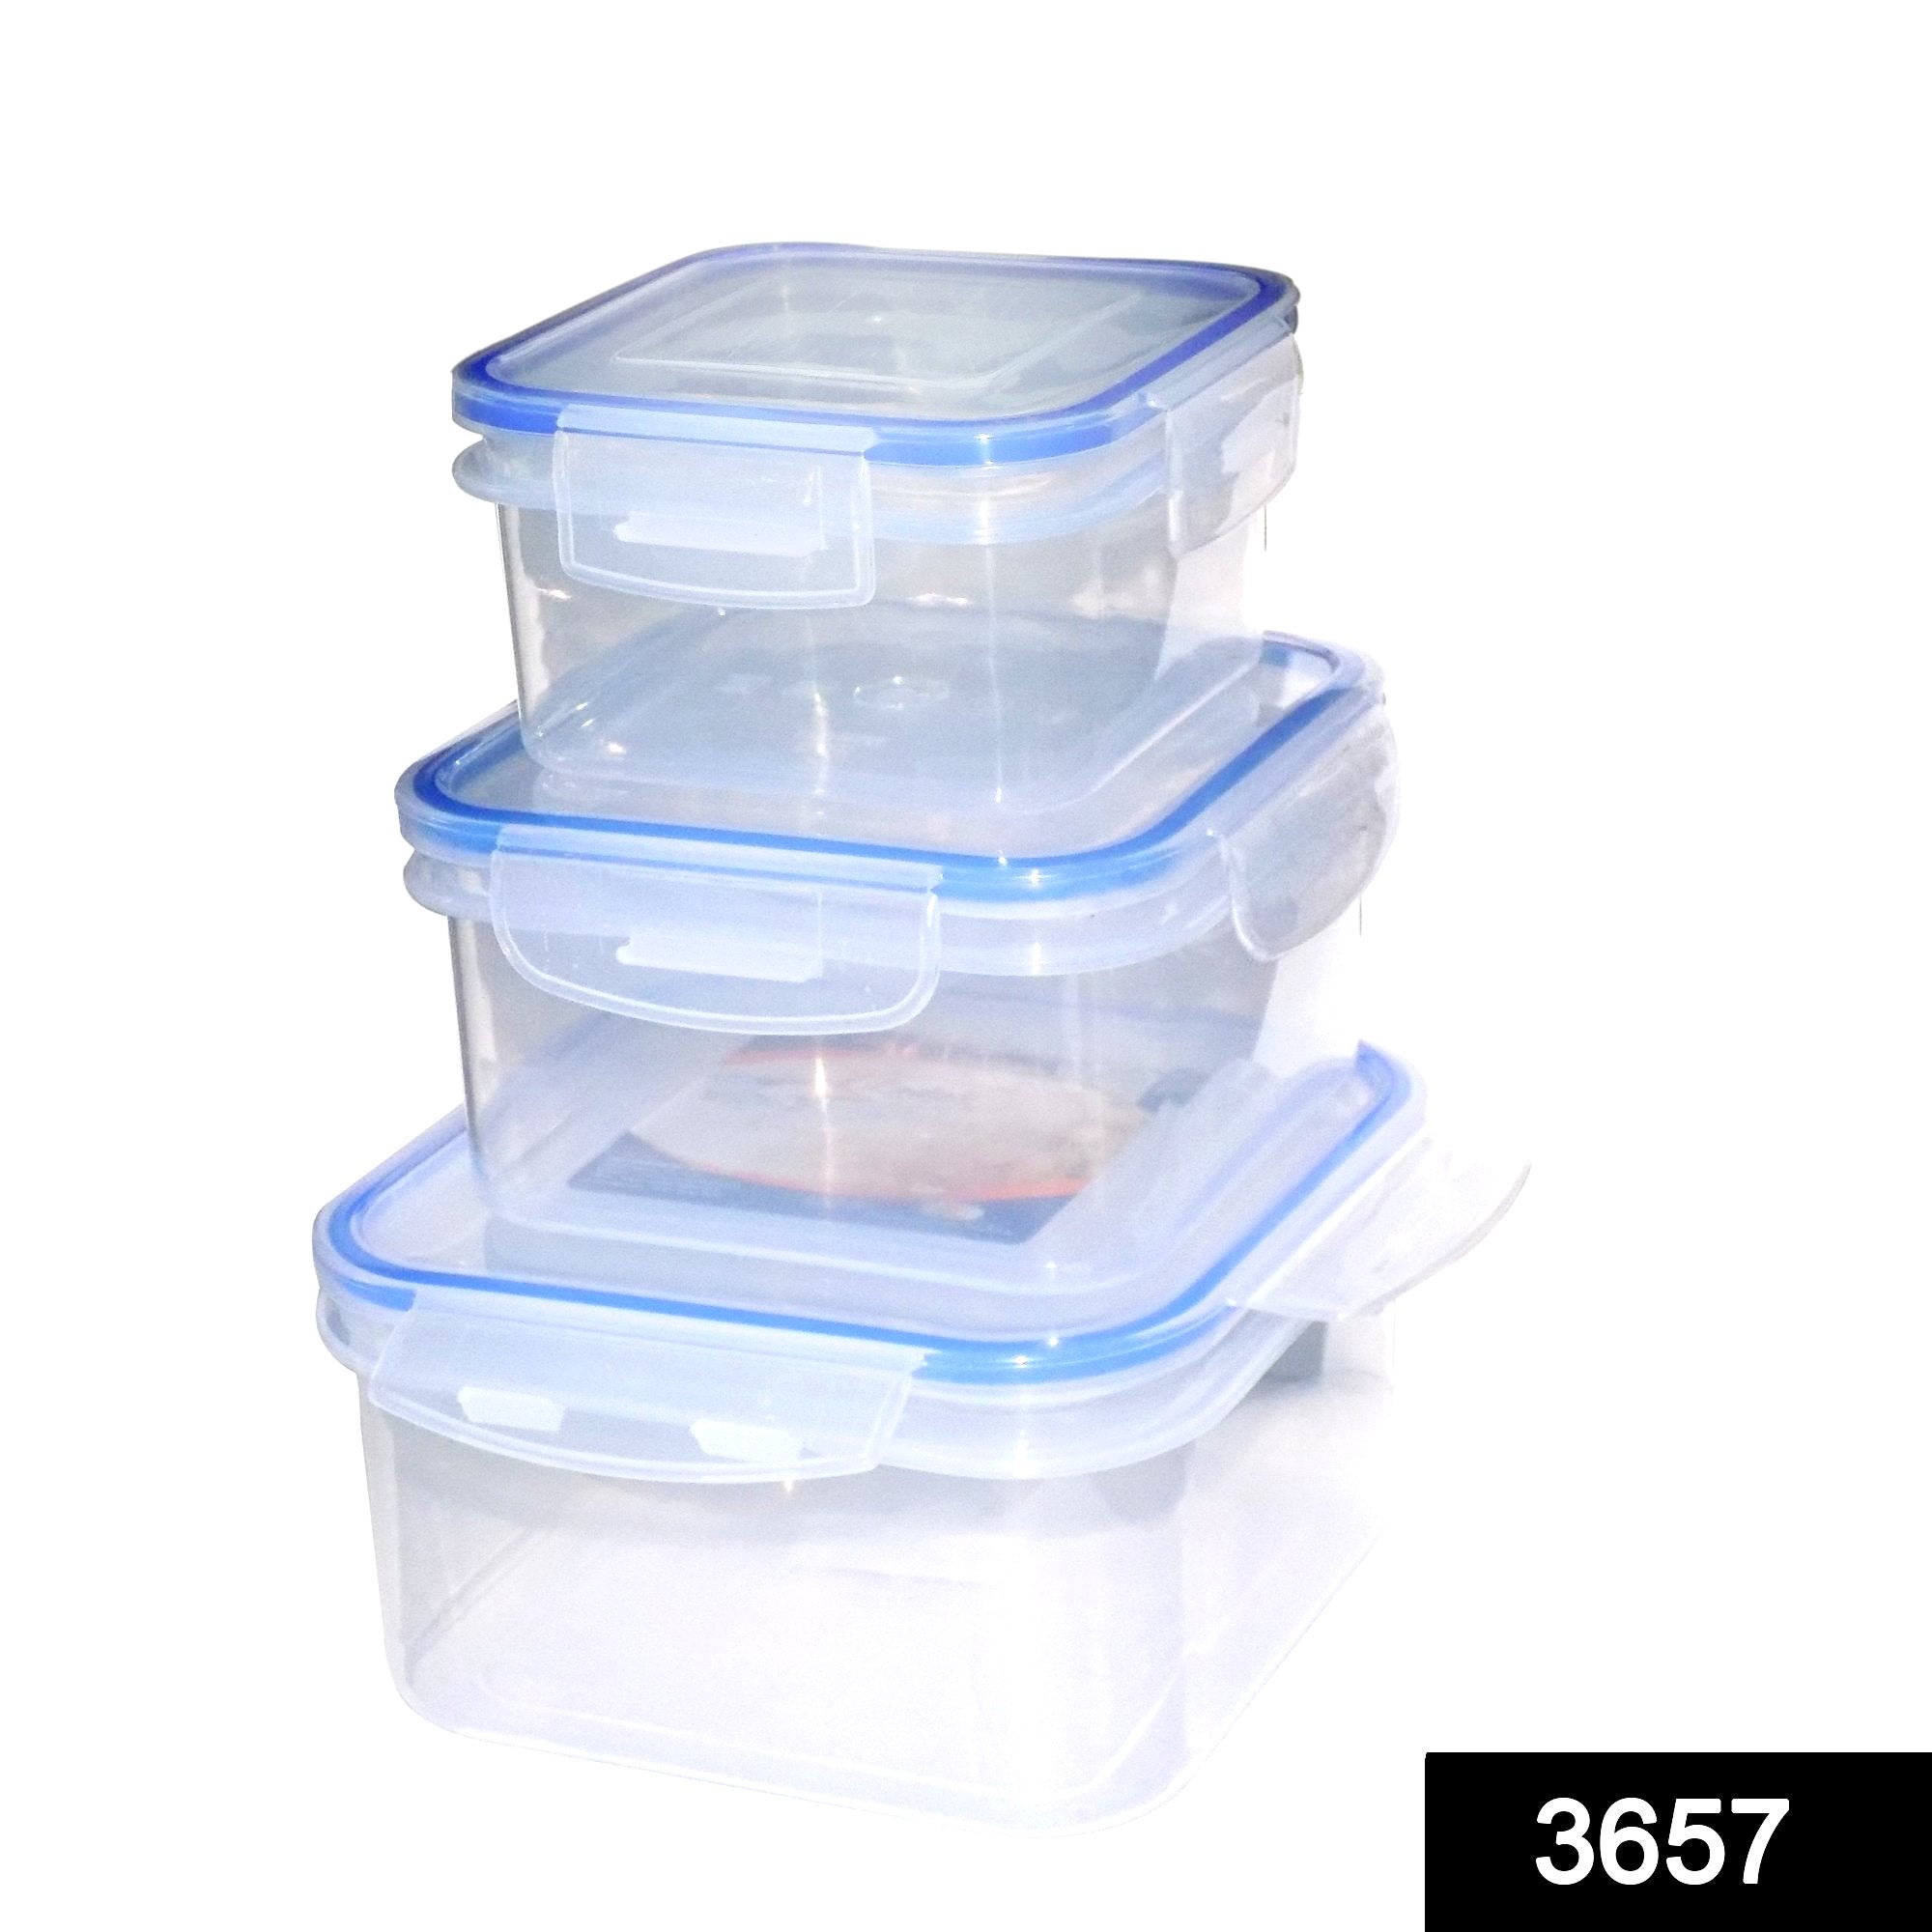 3657 Multipurpose Airtight Food Storage Containers (Set of 3 pcs) - SkyShopy